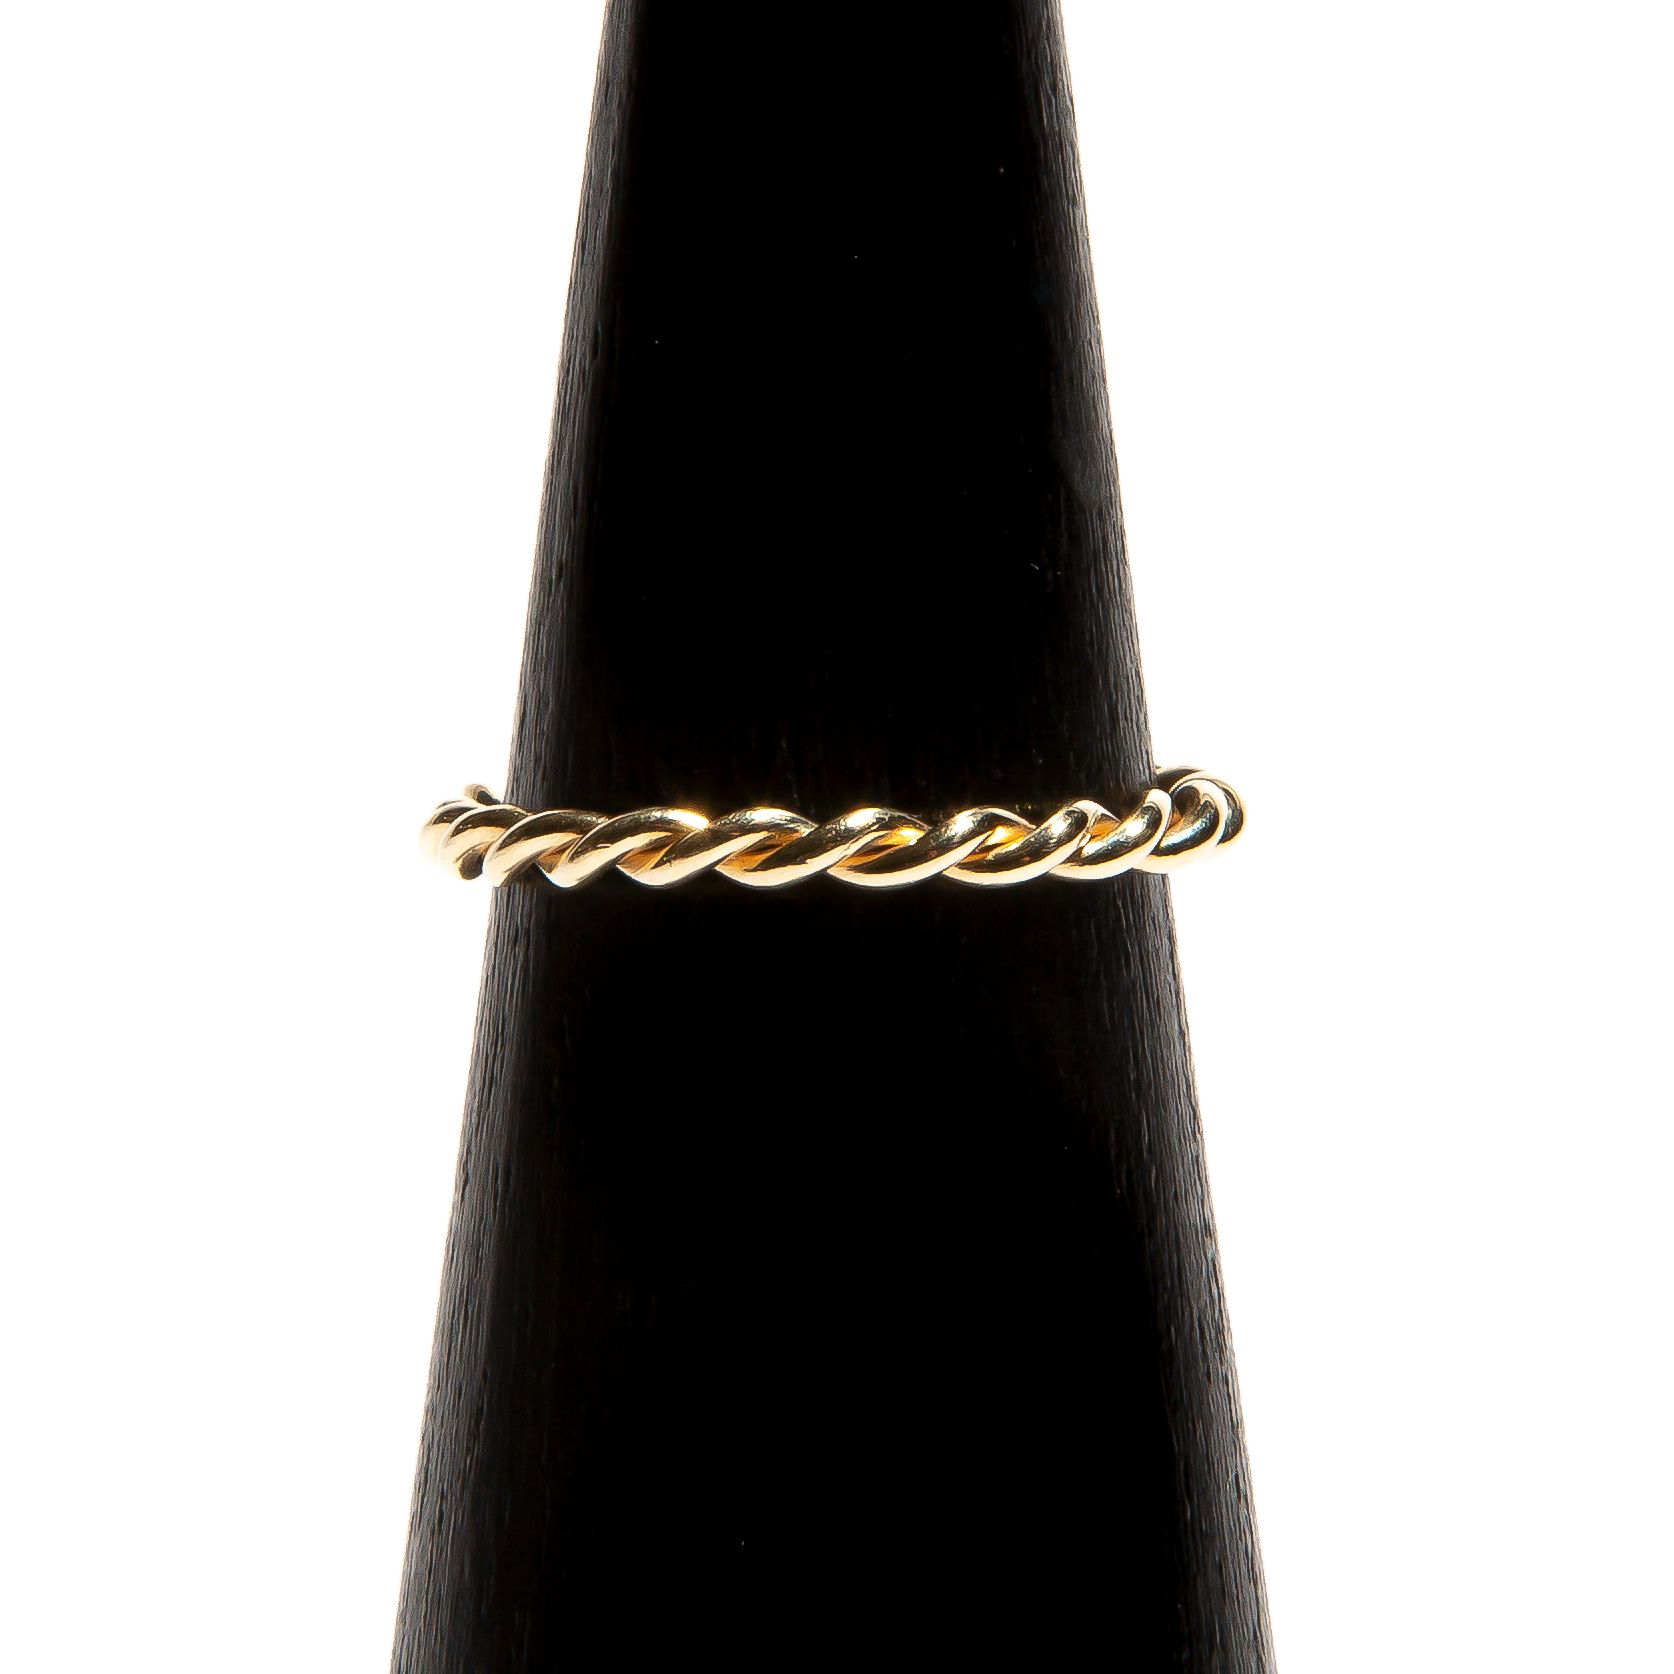 AGNES: Yellow Gold Twisted Band